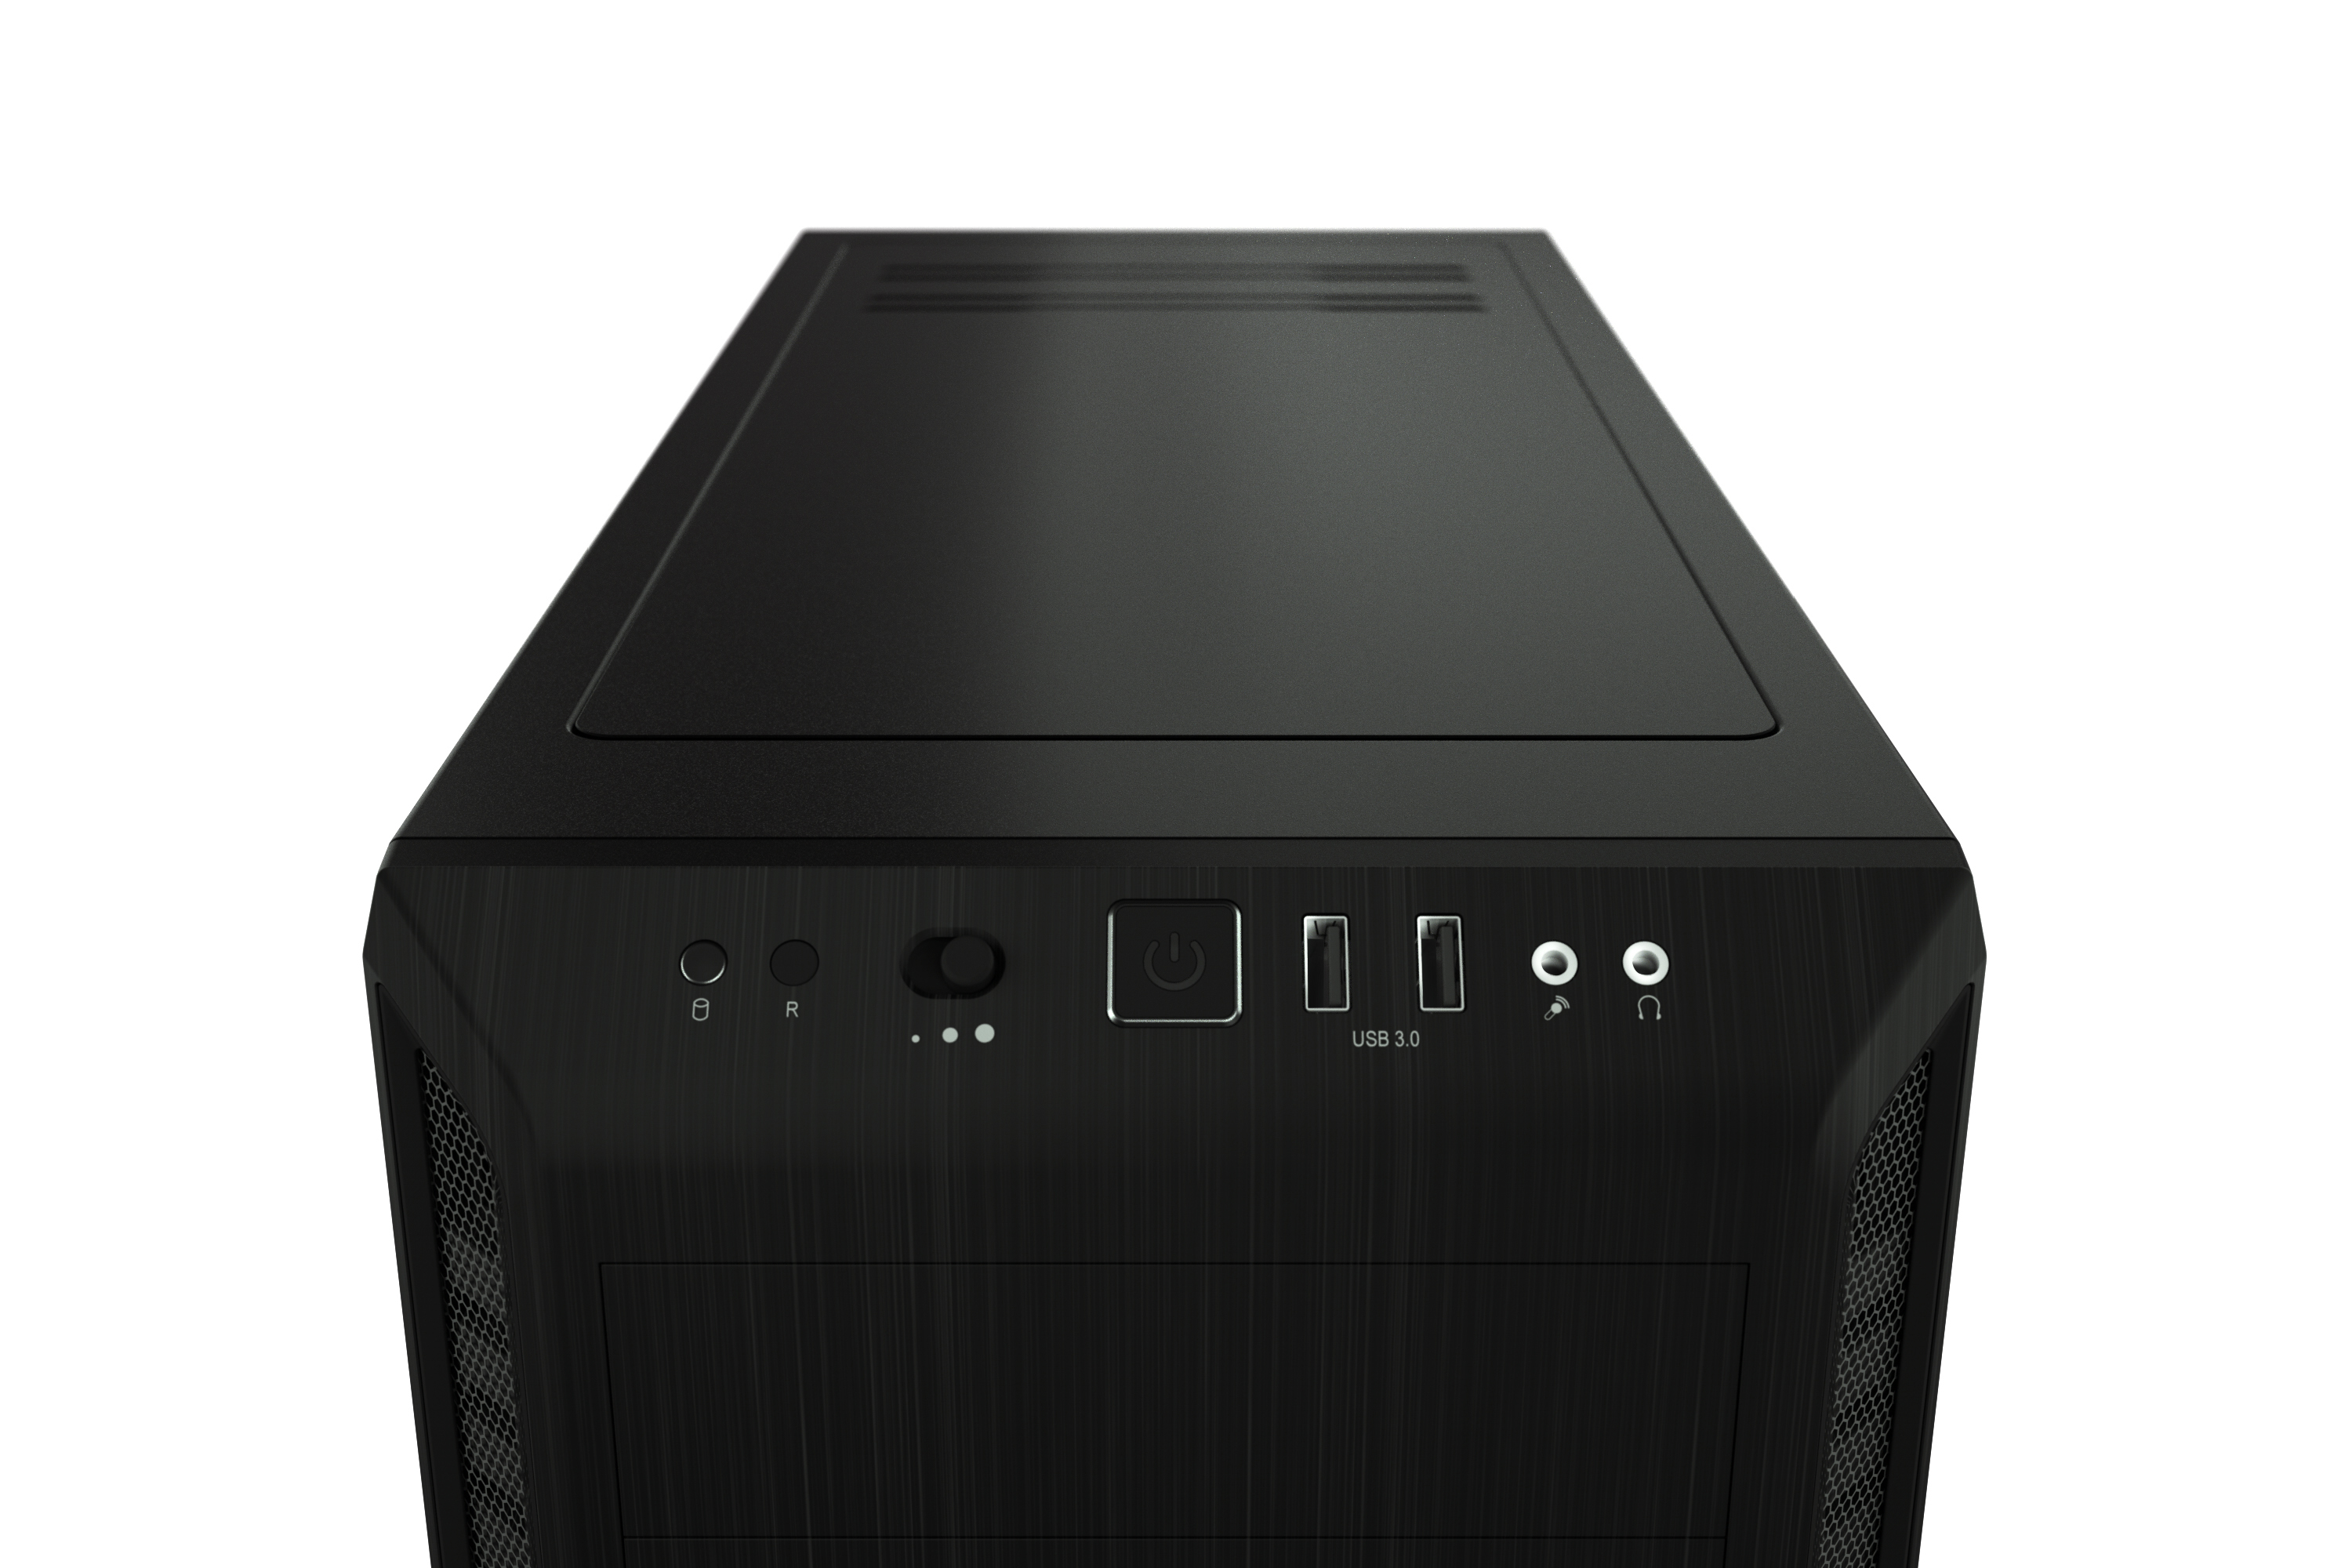 be quiet! Pure Base 600 Window Black, 492 x 220 x 470, IO-panel 2x USB 3.0, HD Audio, 2x 5,25, 3x 3,5, 2x 2,5, inc 1x 140 mm en 1x 120 mm Pure Wings 2, dual air channel cooling, 3 step fan controller 3x3 pin, Watercooling ready, Glass Windows Side Panel